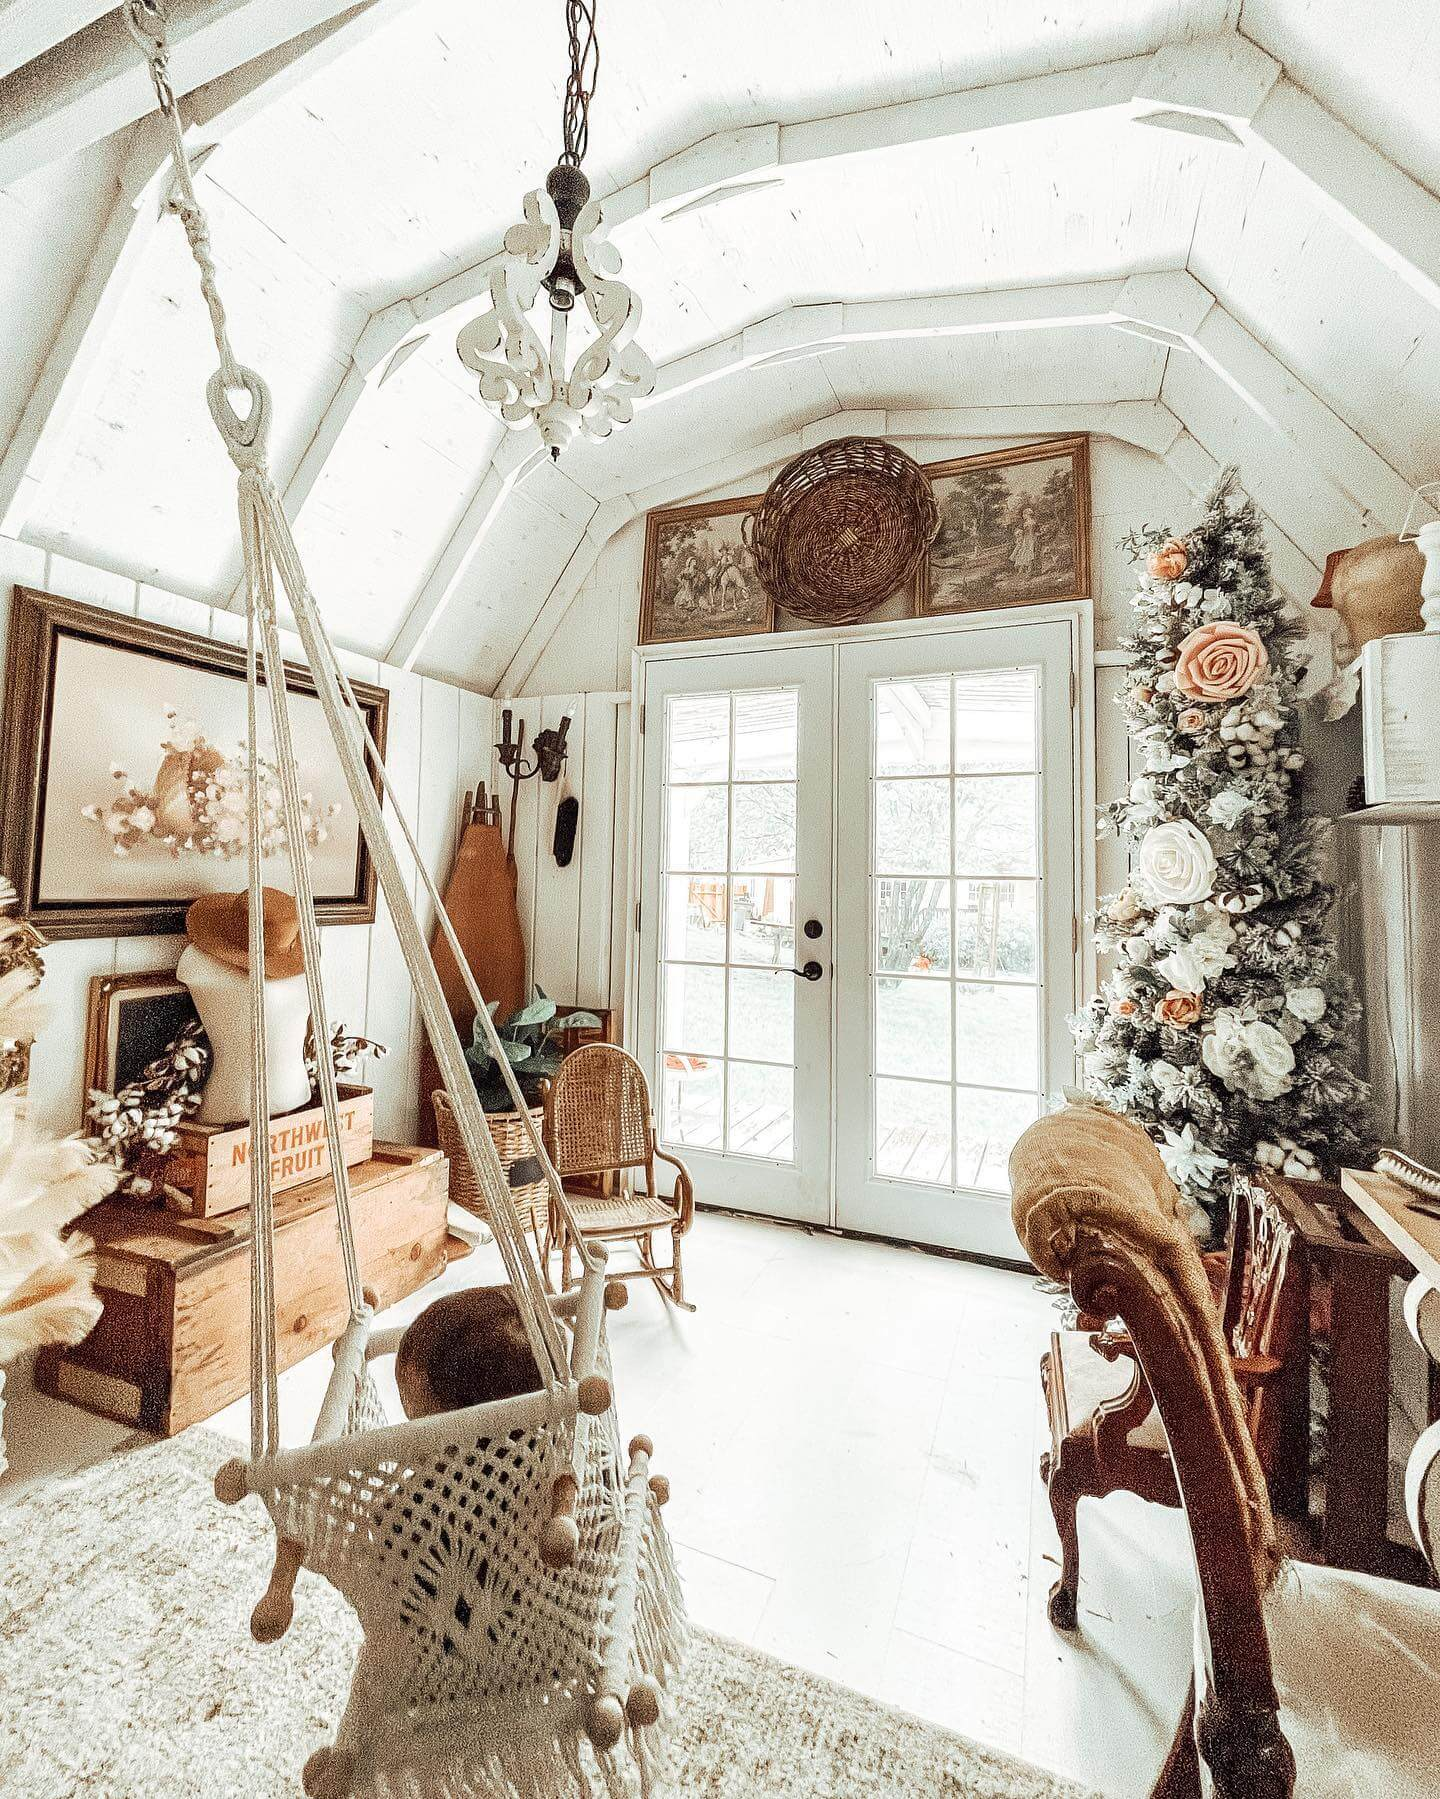 How Can I Decorate The Interior Of My She Shed